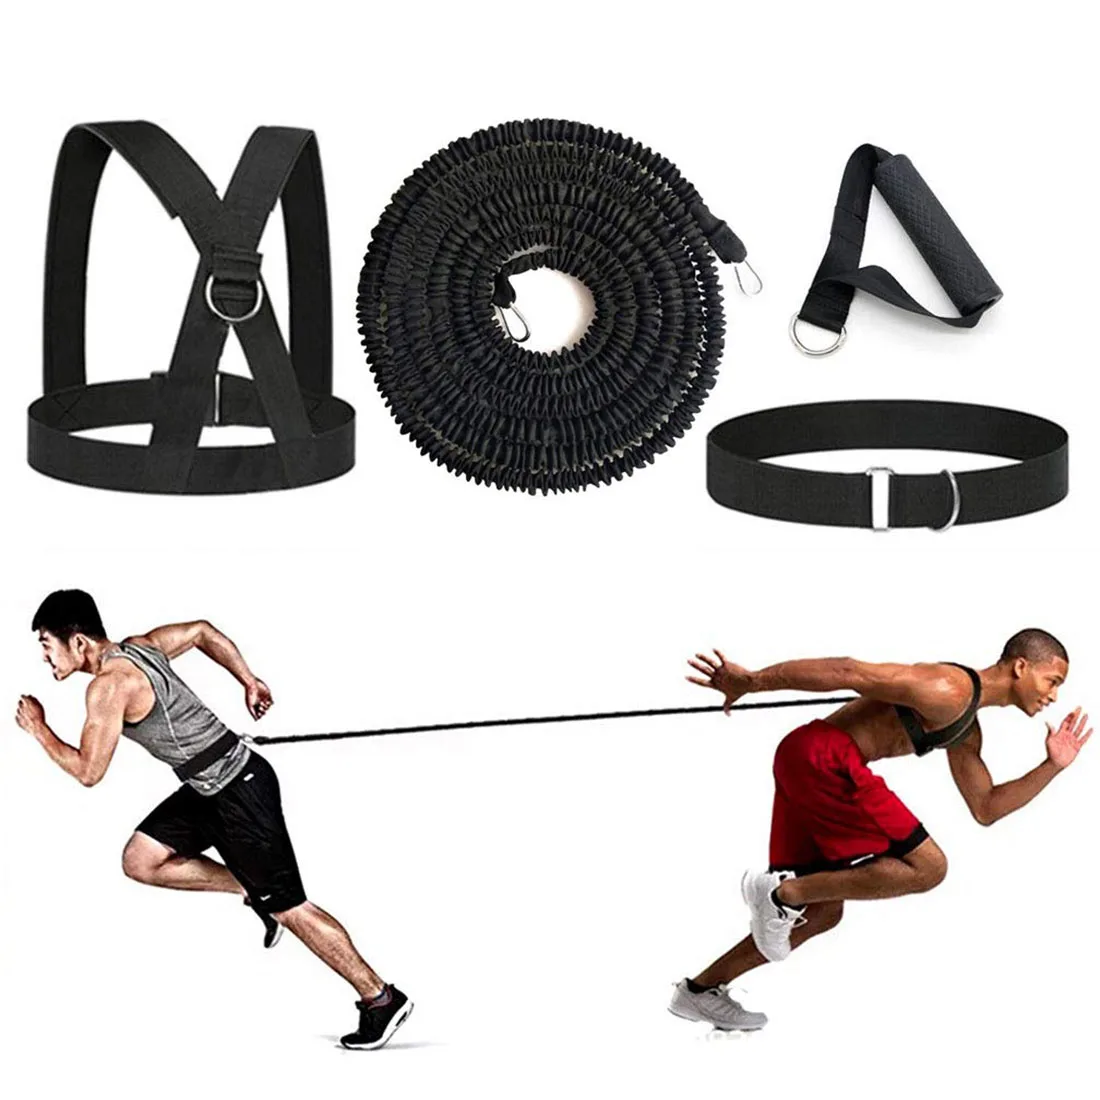 Resistance Fitness Rubber Band Set Workout Yoga Sport Boxing Soccer Basketball Jump Speed Strength Training Exercise Equipment